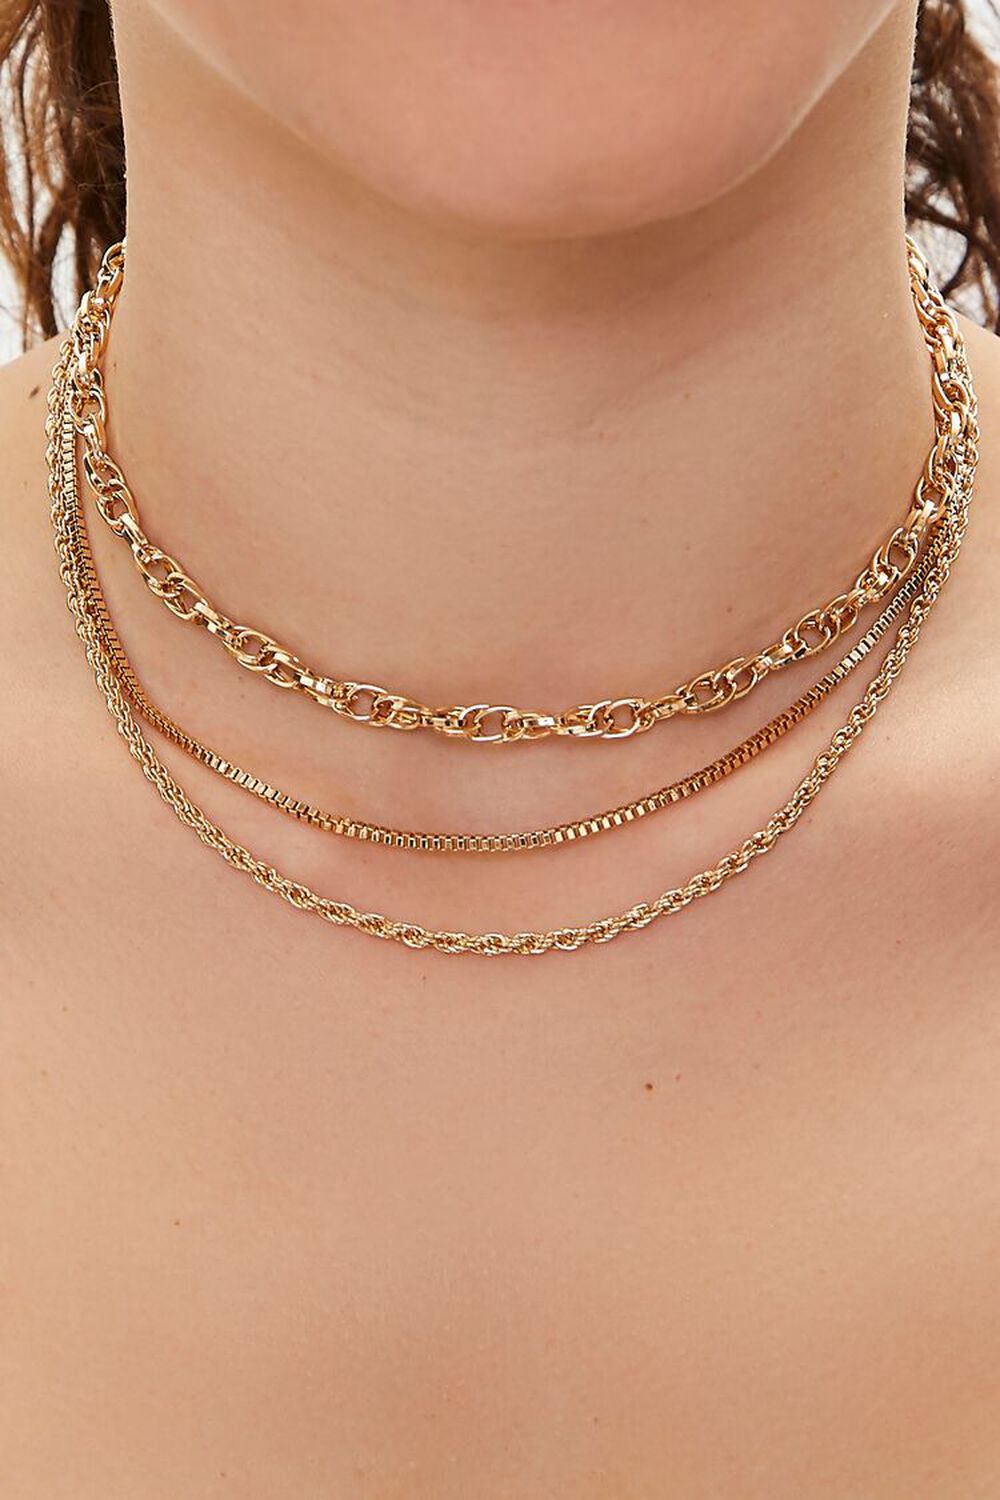 Assorted Chain Necklace Set, image 1